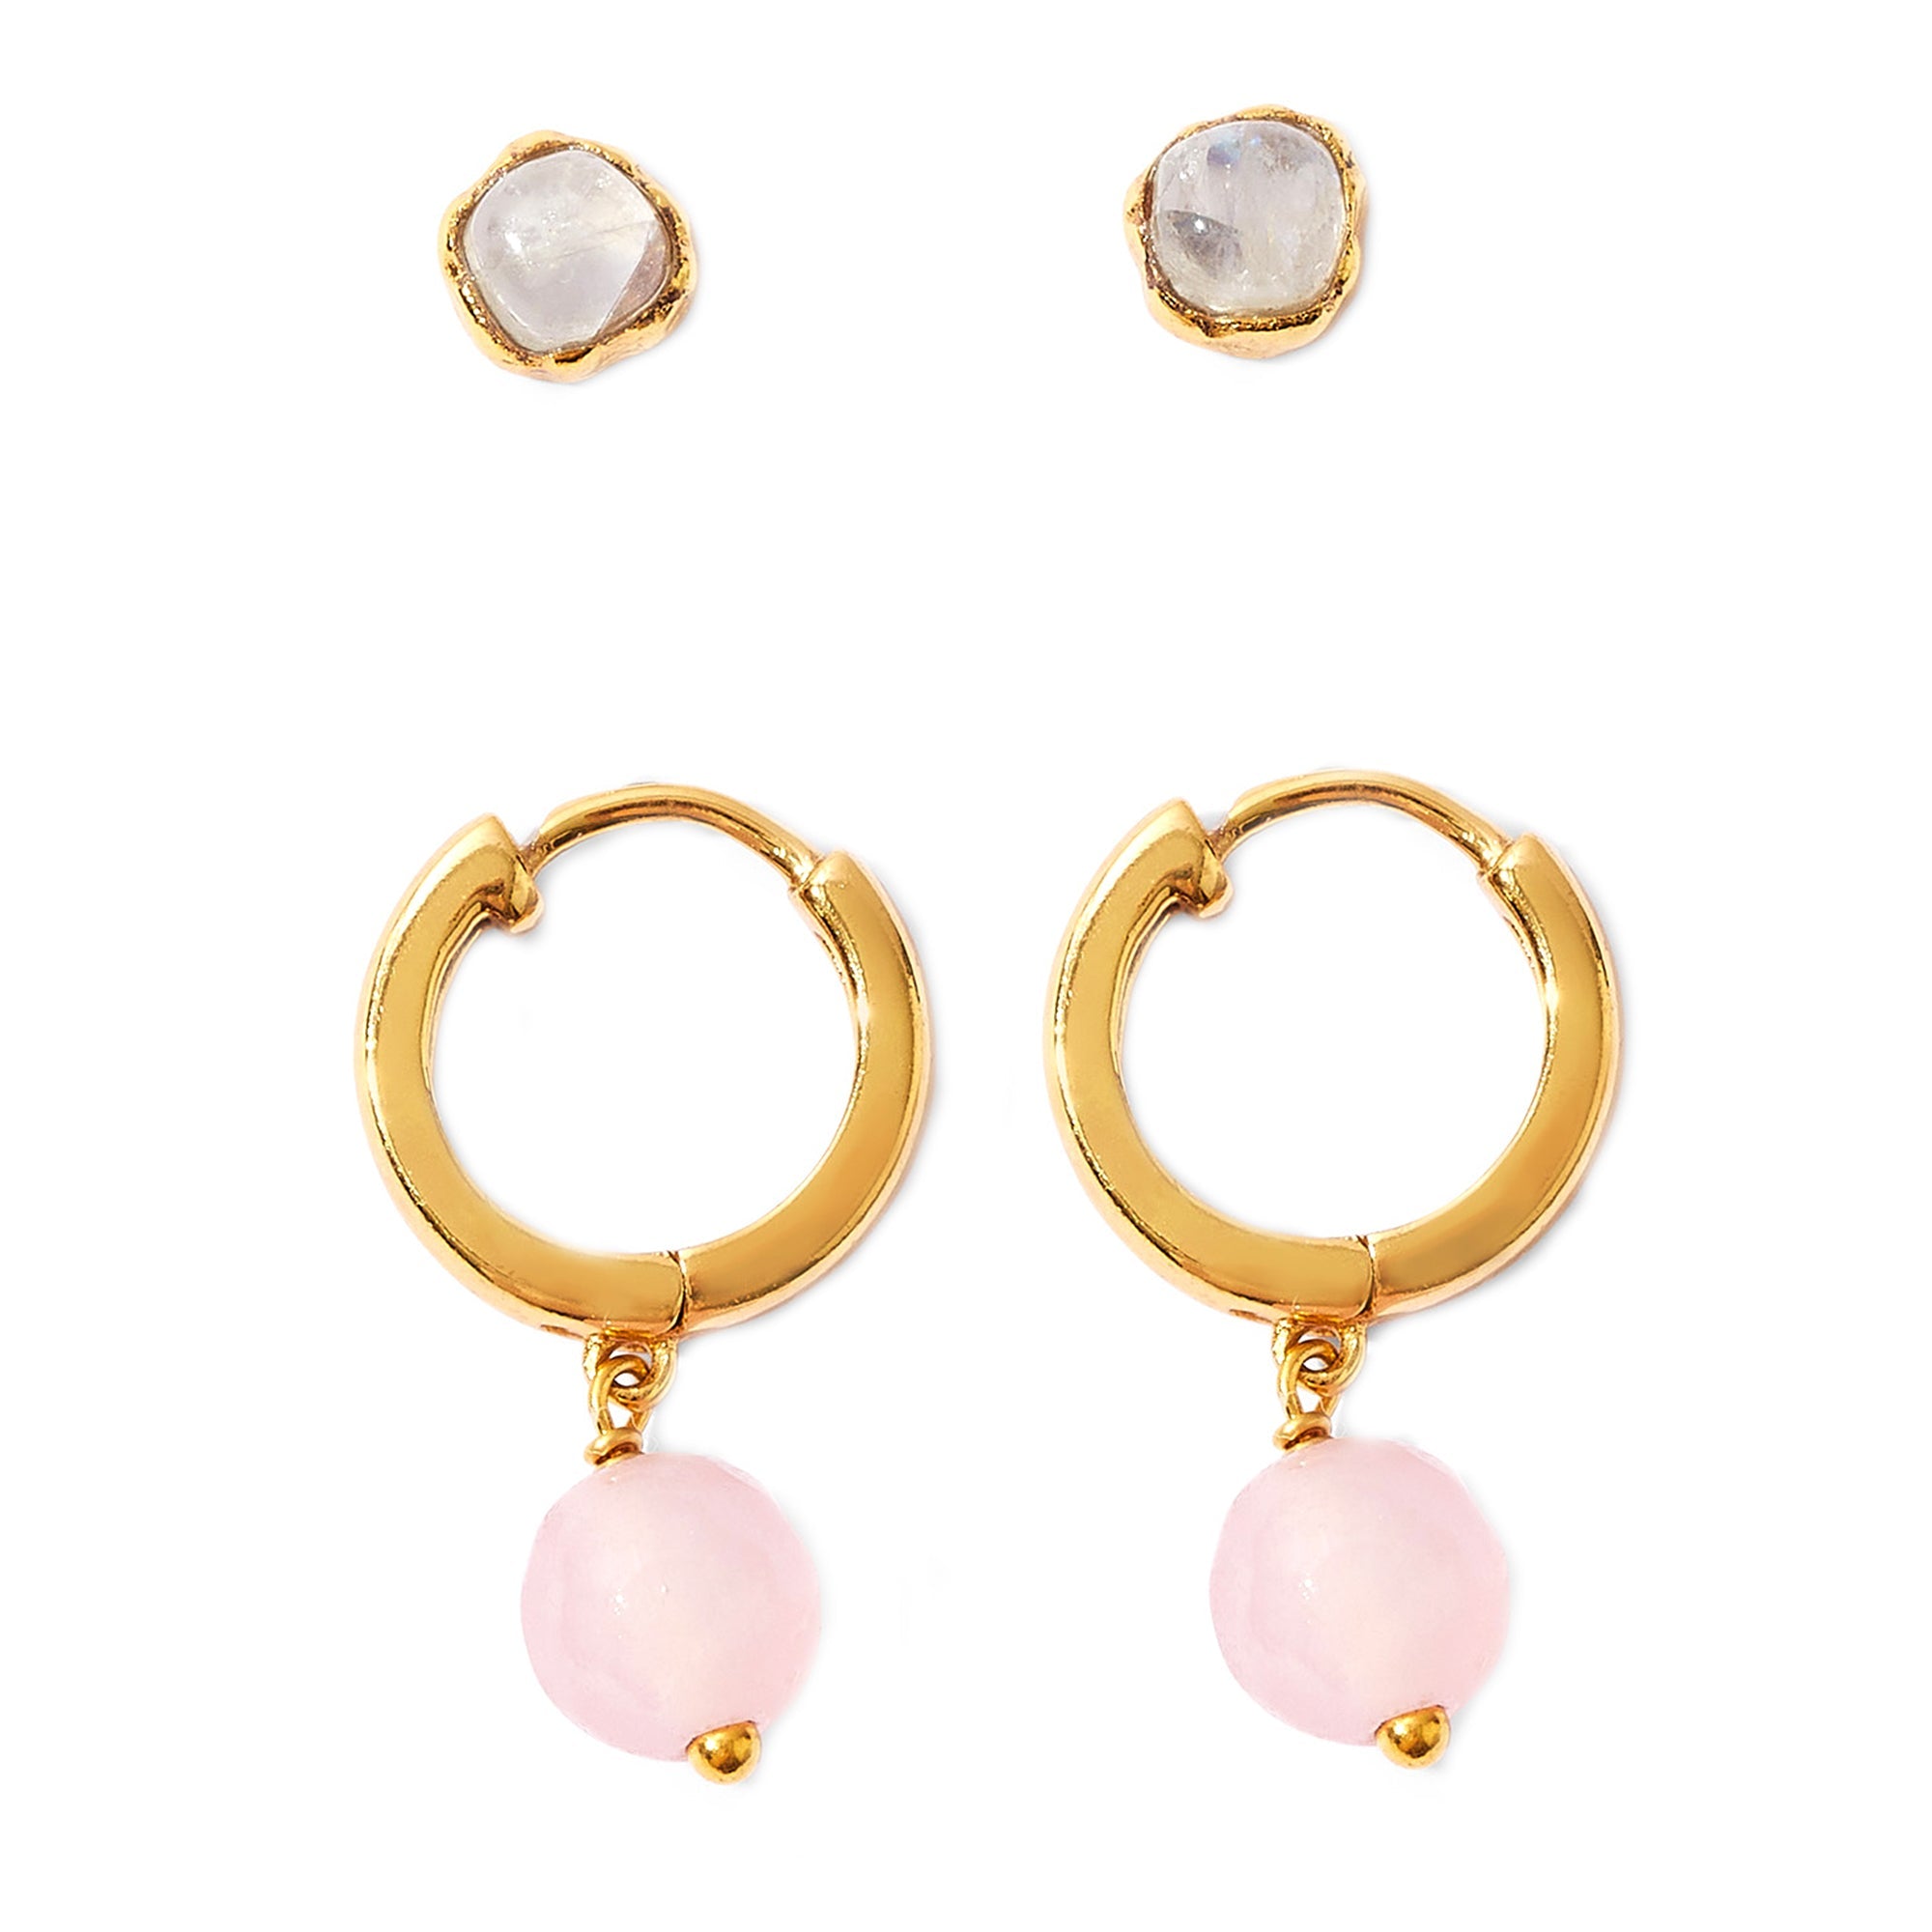 Real Gold Plated Z Healing Stone Earrings Set of 2 For Women By Accessorize London